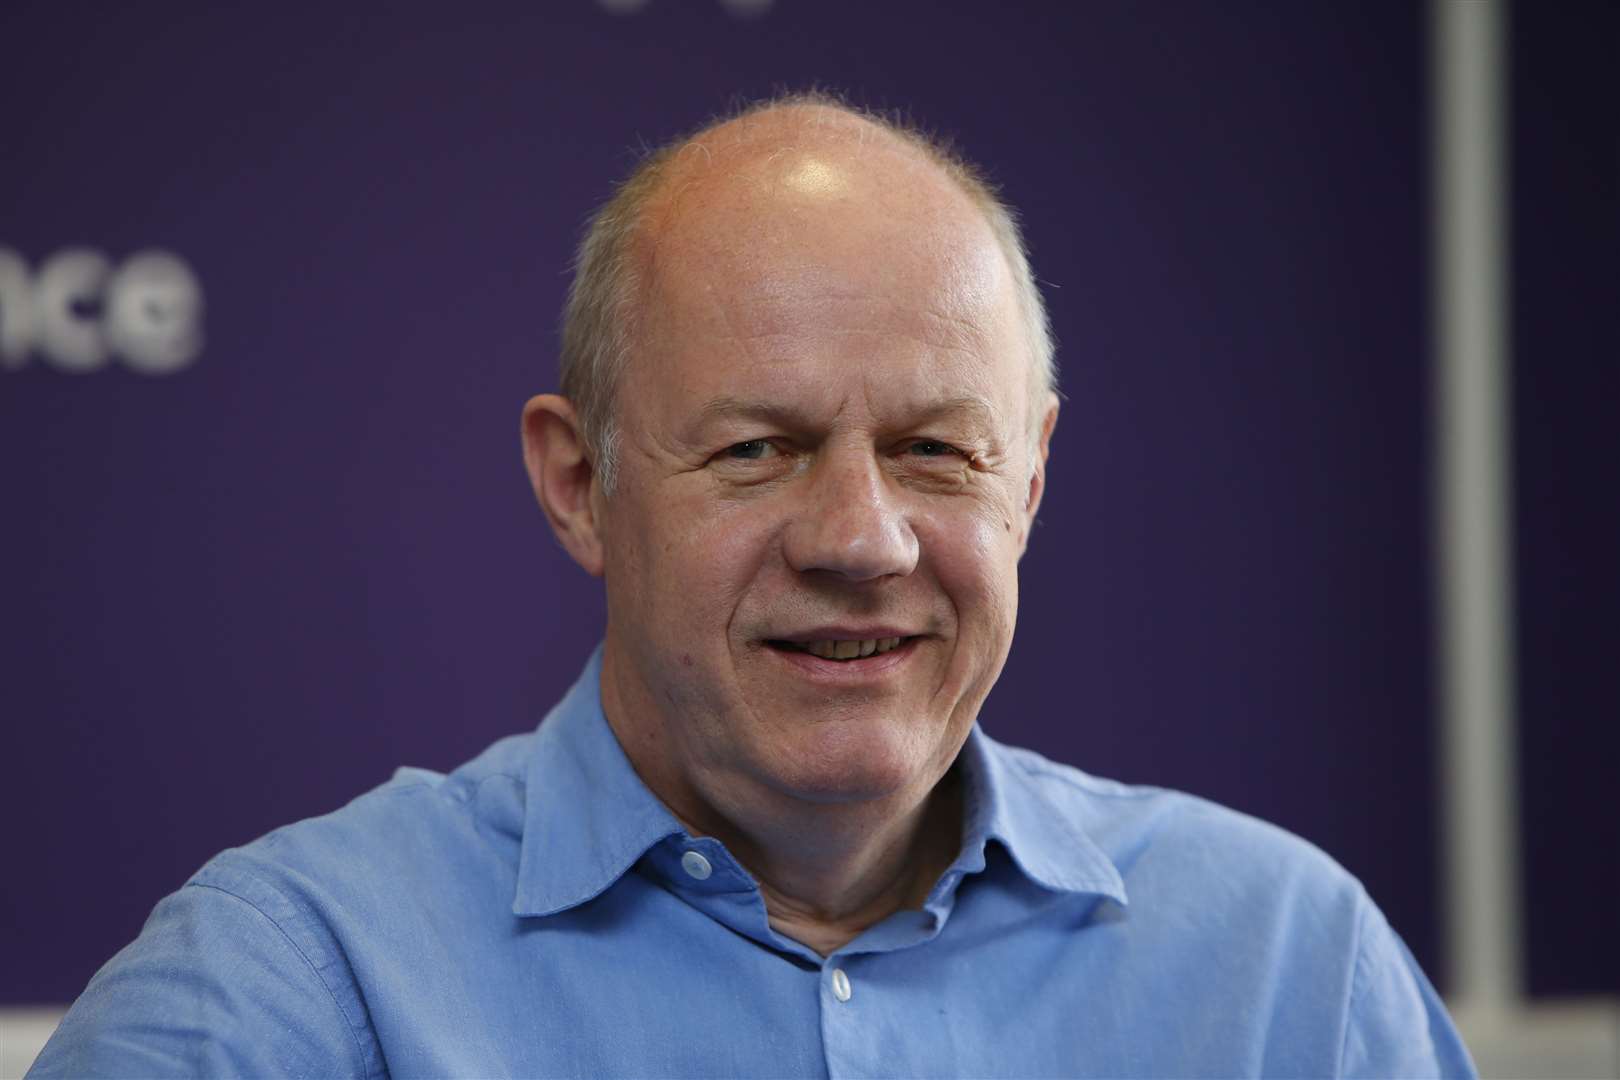 Damian Green MP welcomes the filling of more units in the town centre, regardless of the type of shop